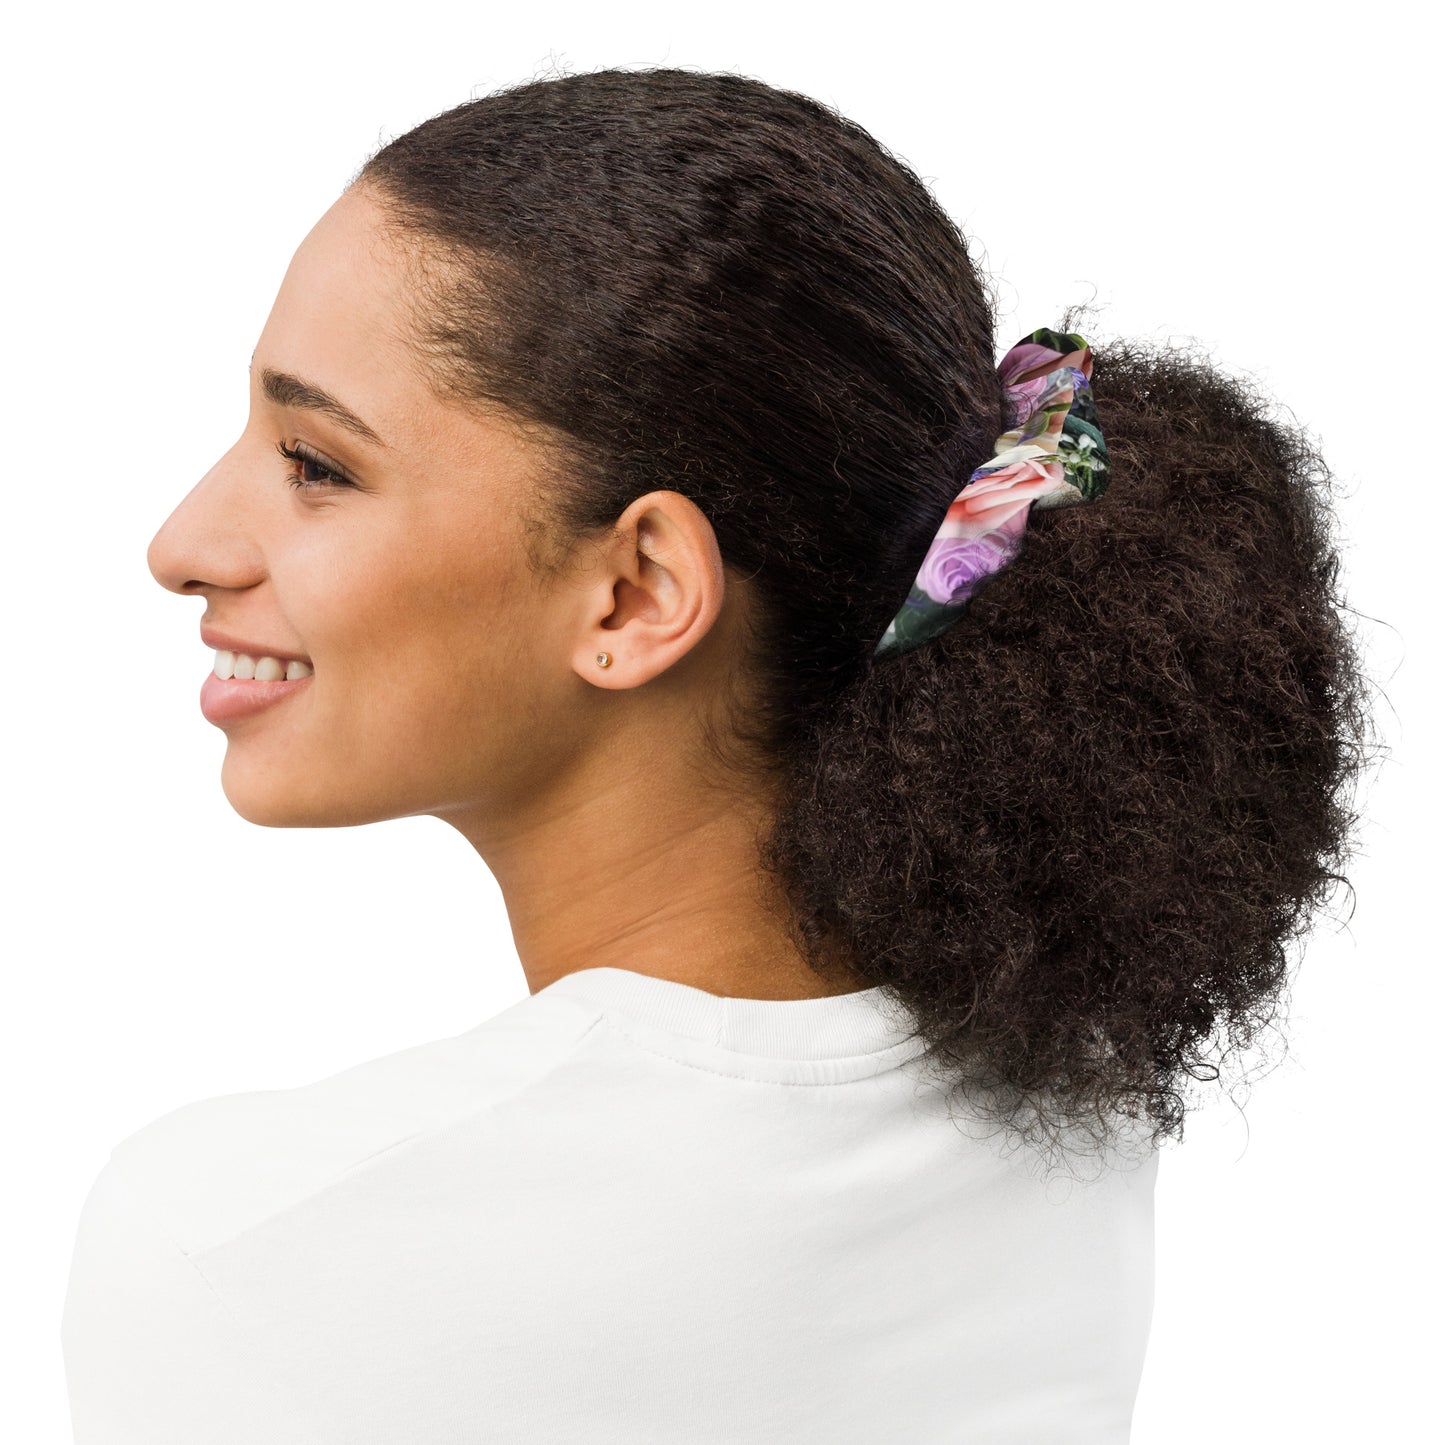 Multicolored floral hair scrunchie with pink, purple, and green flowers.